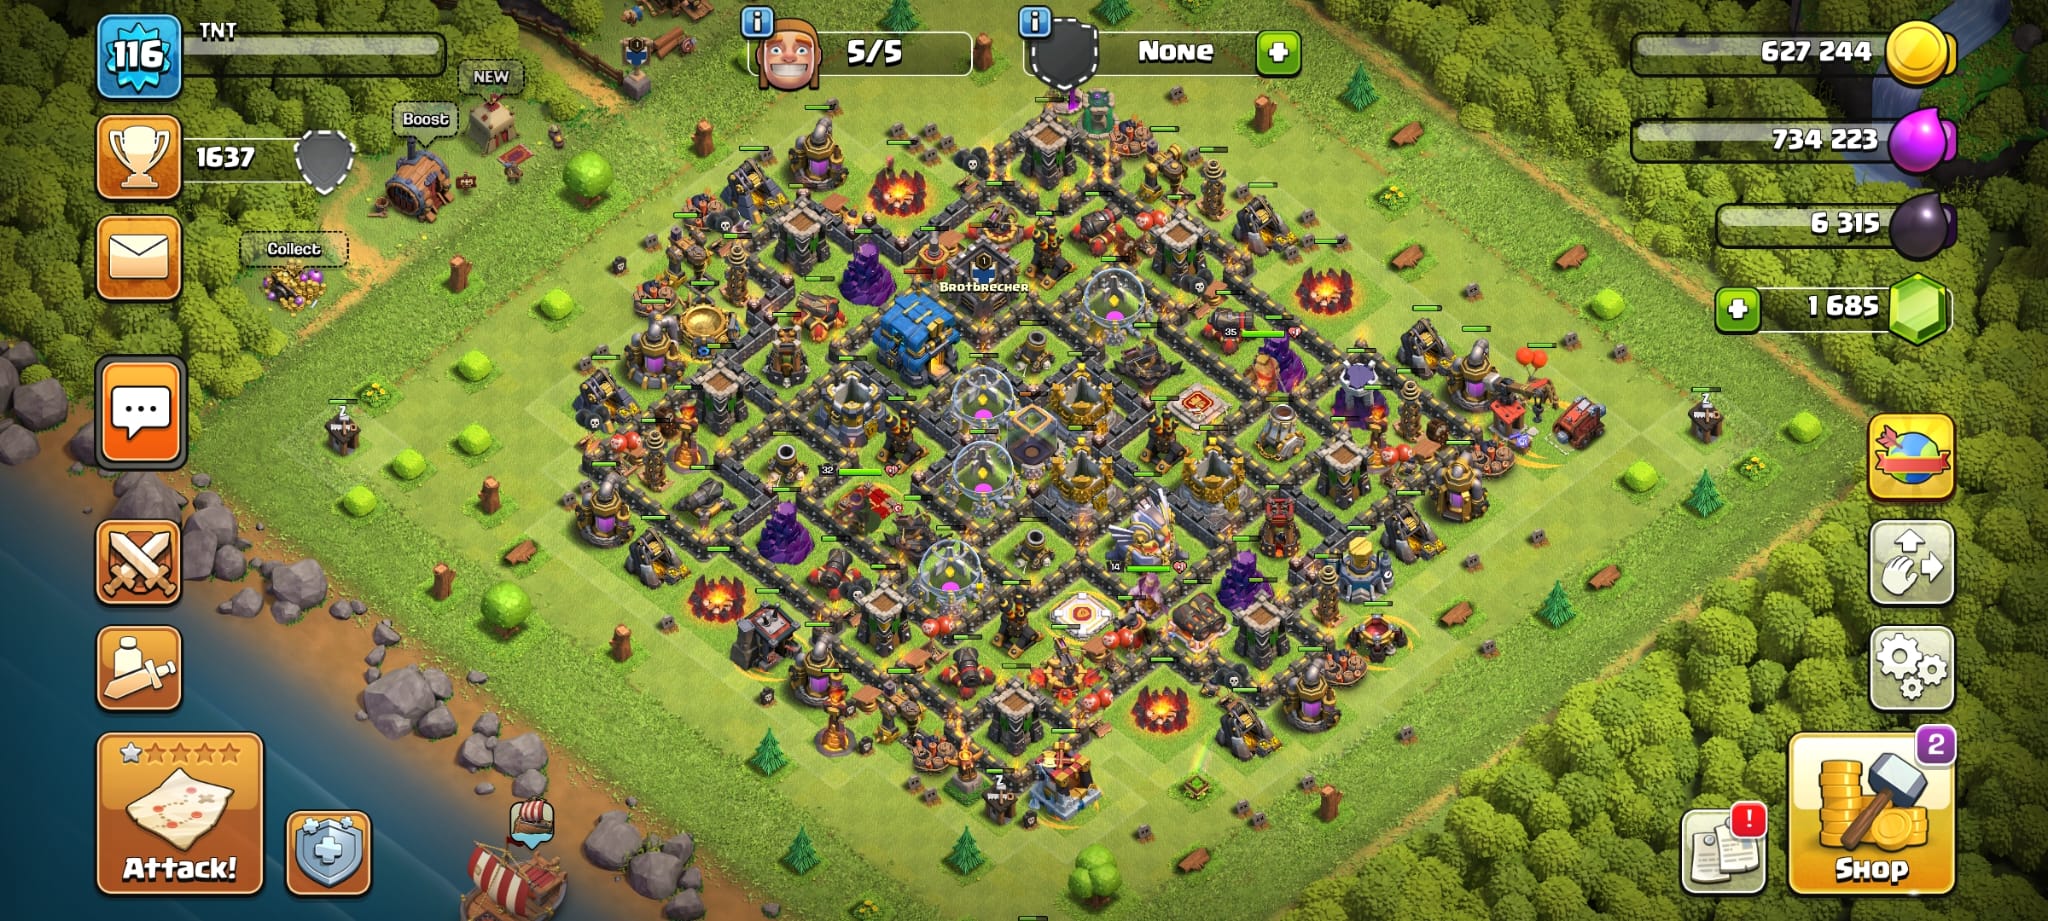 #crafty [Code 2735] Th12 XP 116 / Compte Dons / Very Cheap 